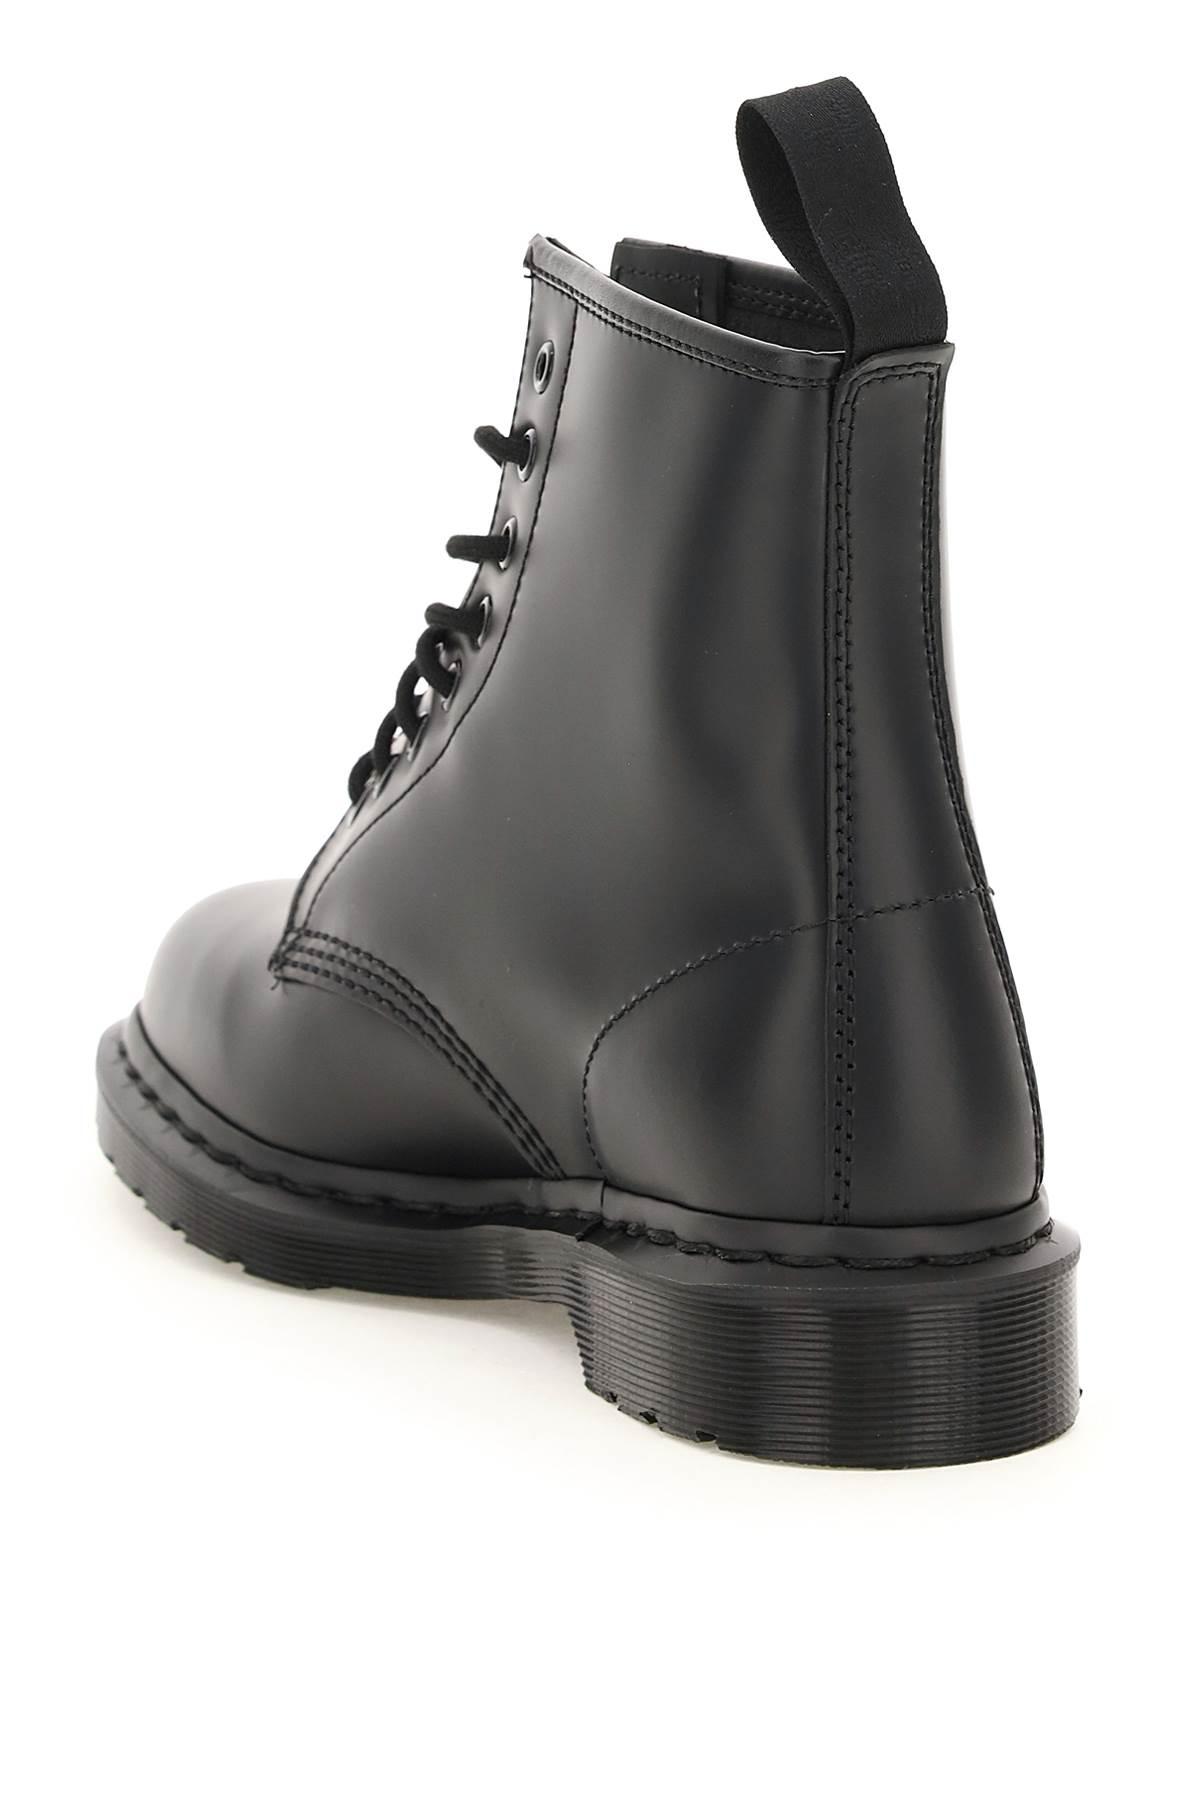 Dr. Martens Leather 1460 Mono Smooth Lace-up Combat Boots in Black 